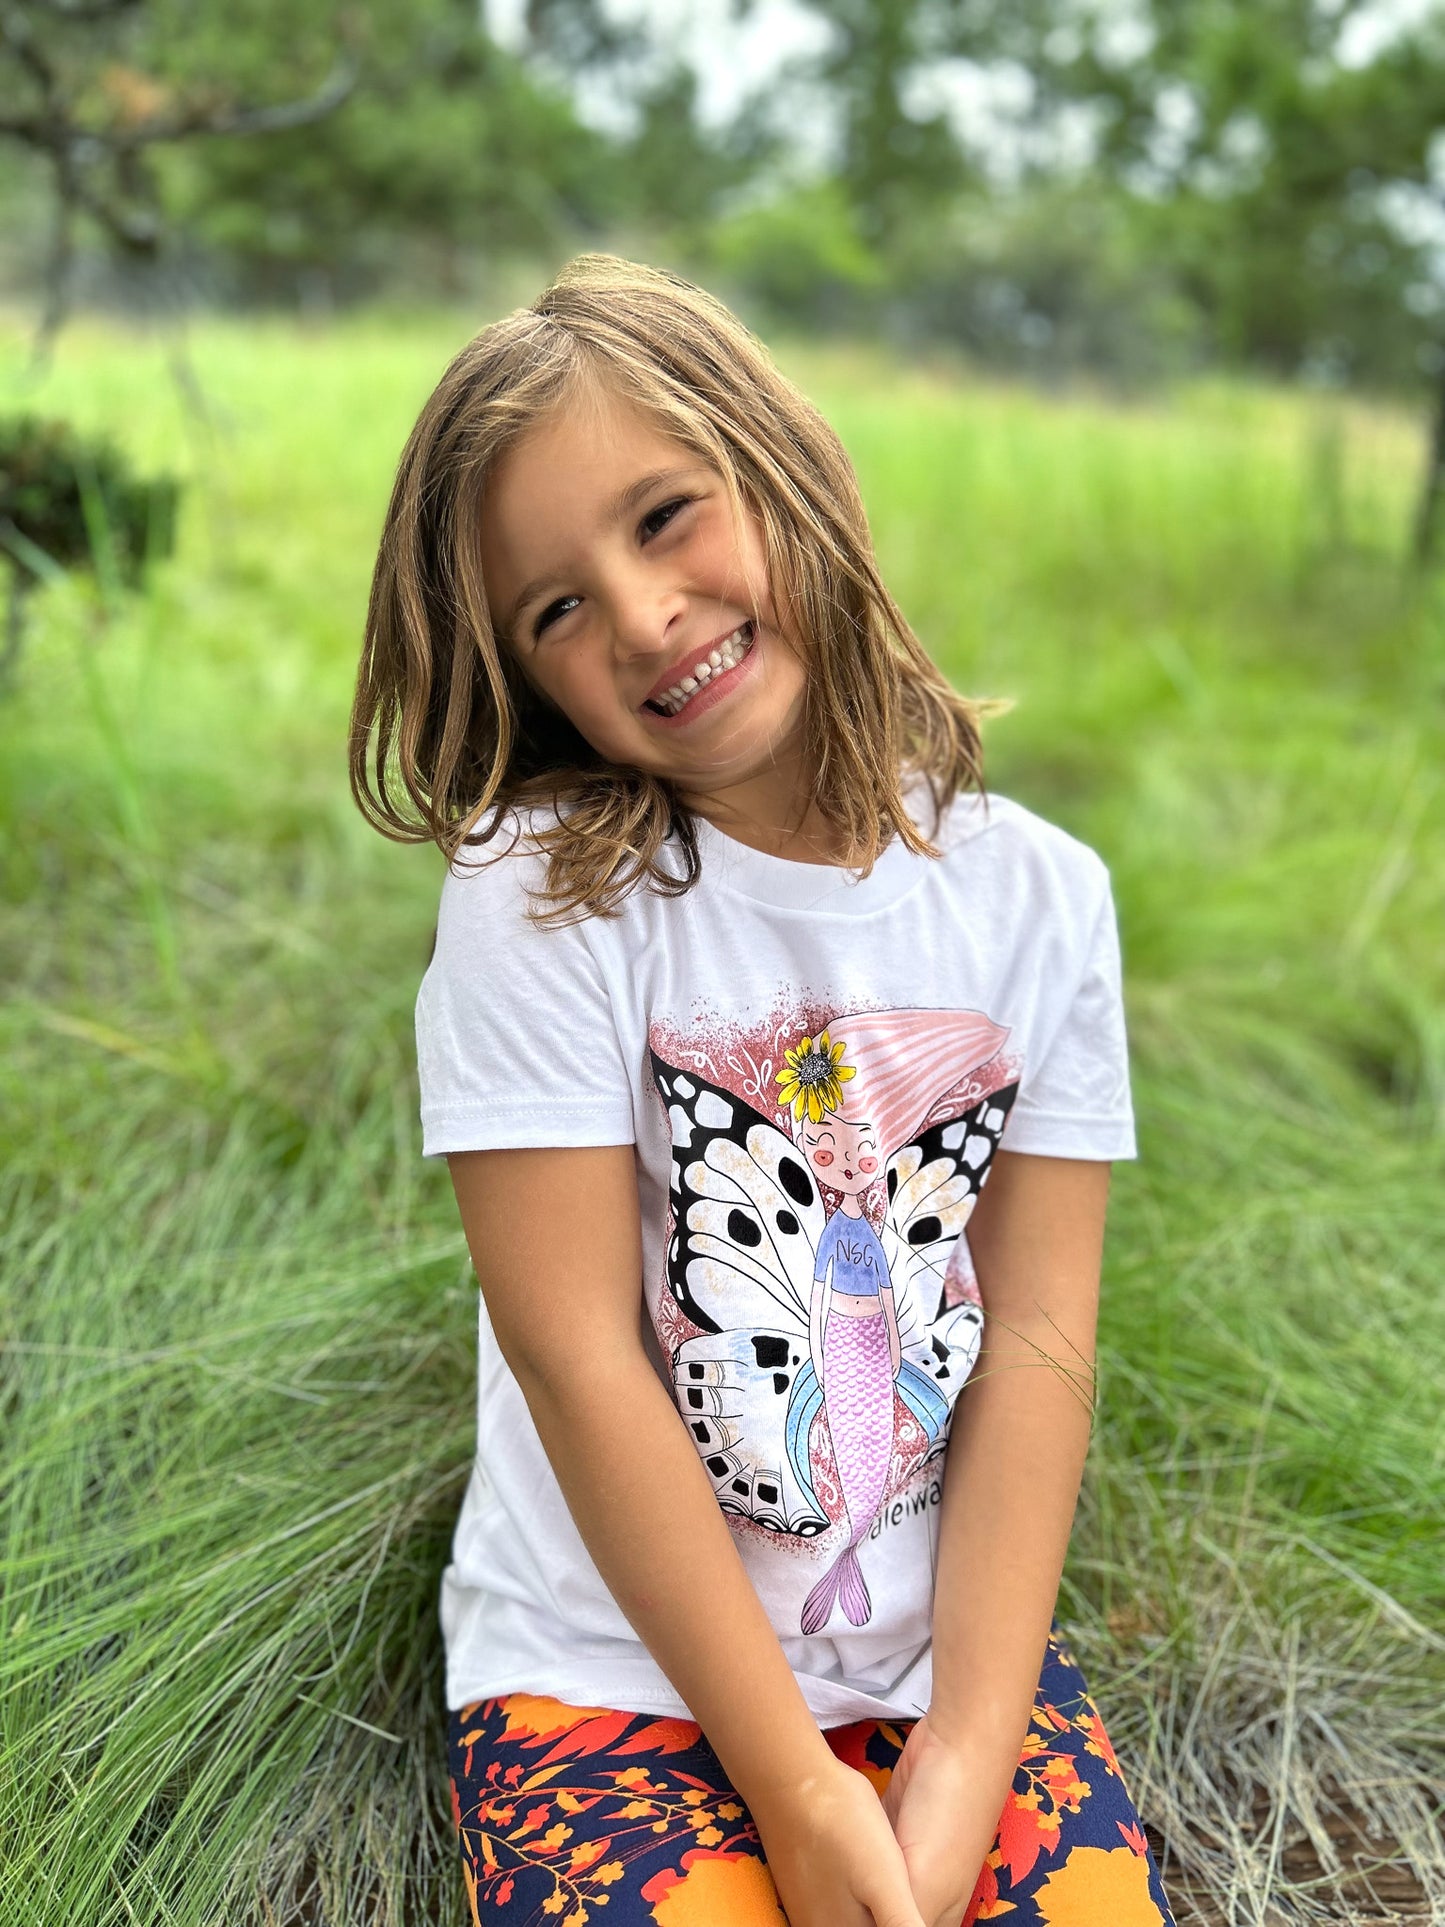 Load image into Gallery viewer, Haleiwa Girl Mermaid Butterfly graphic tee for girls, kids. Designed by female artist Nadia Watts in Southern California. A perfect gift for the mermaid lover in your life.
